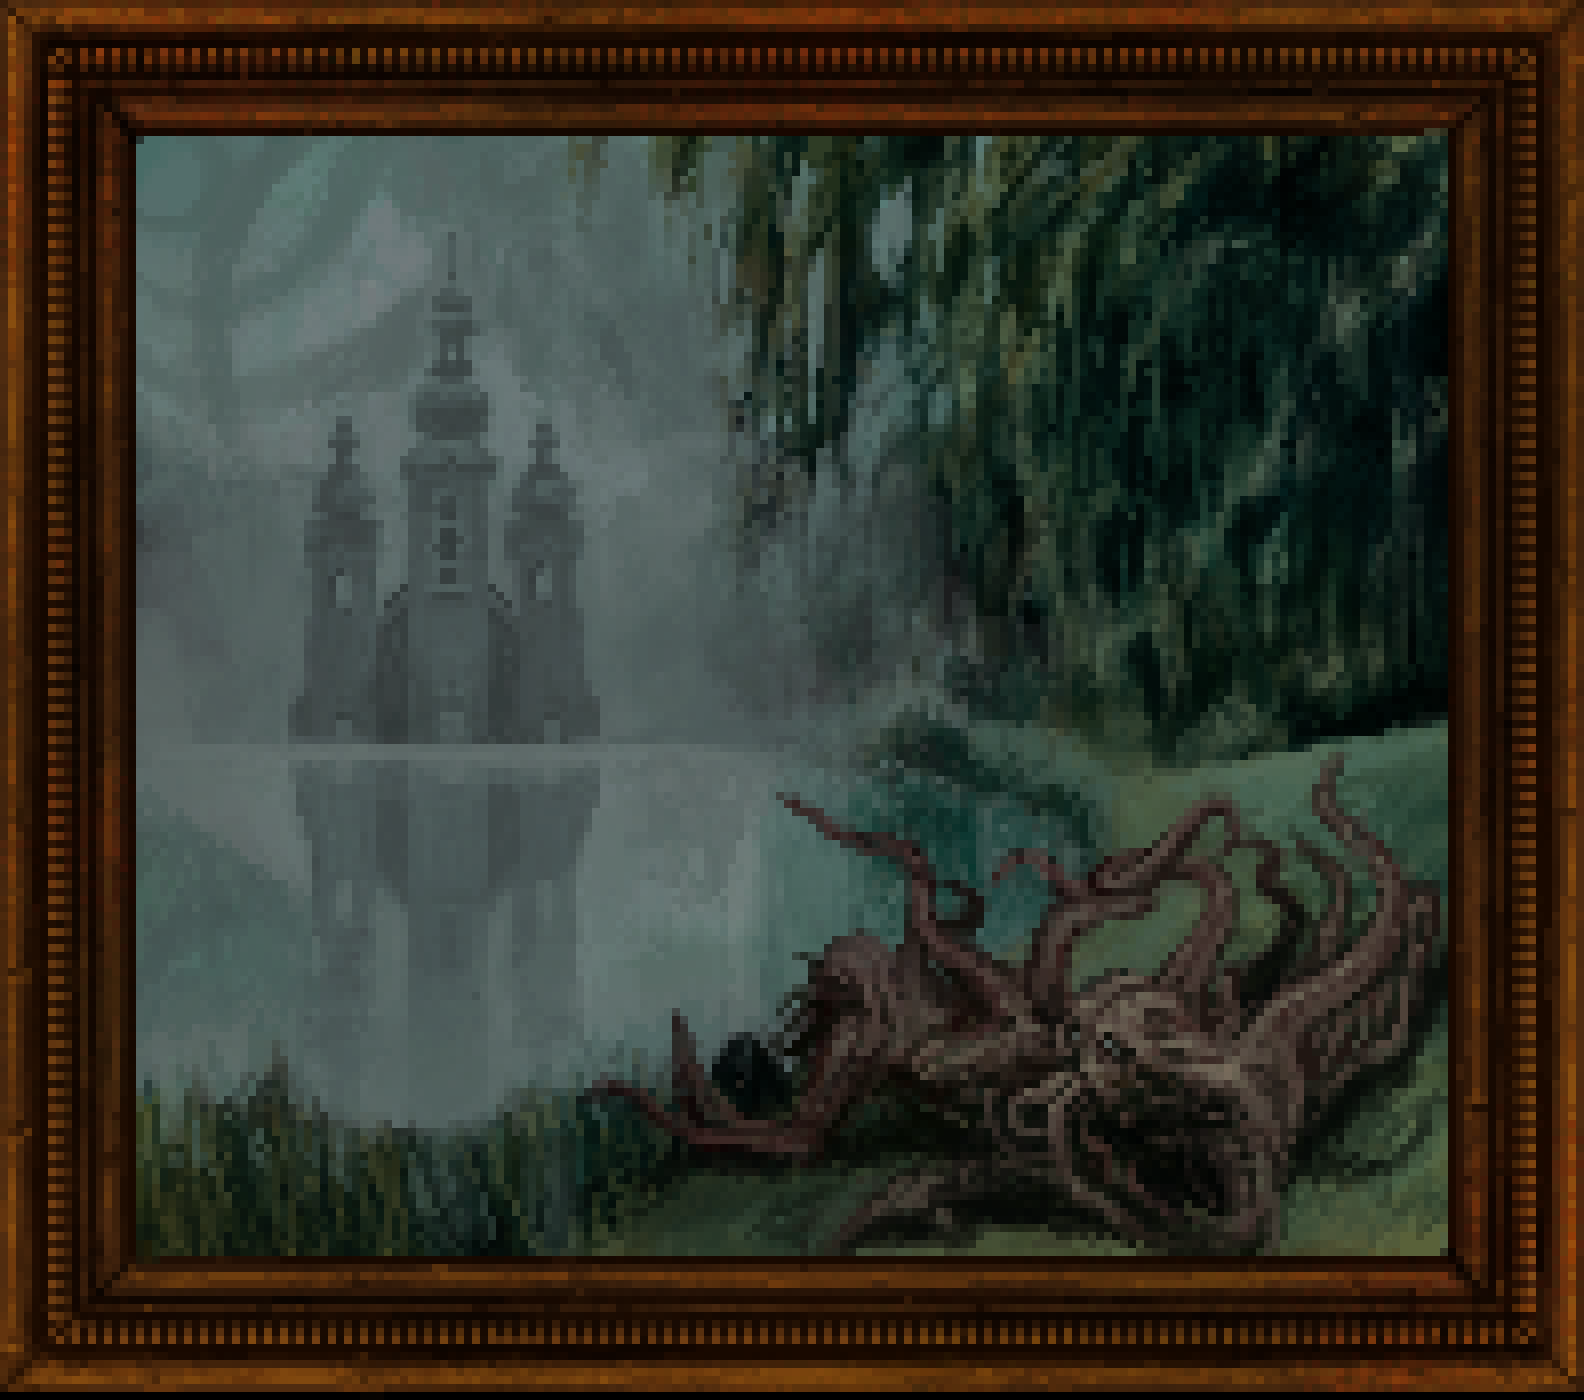 in the final stage, the pixel art painting has become even more dim and blue-green. the church has solidified across the lake, and sits menacingly reflected in the water. in the sky above it there is some huge shadow with tentacles coming off it that is difficult to see in the fog, and on the near shore, where the couple was, there are two creatures lying on the ground covered in tendrils and instead of having human faces, they have glowing eyes and huge mouths that have tentacles coming out of them